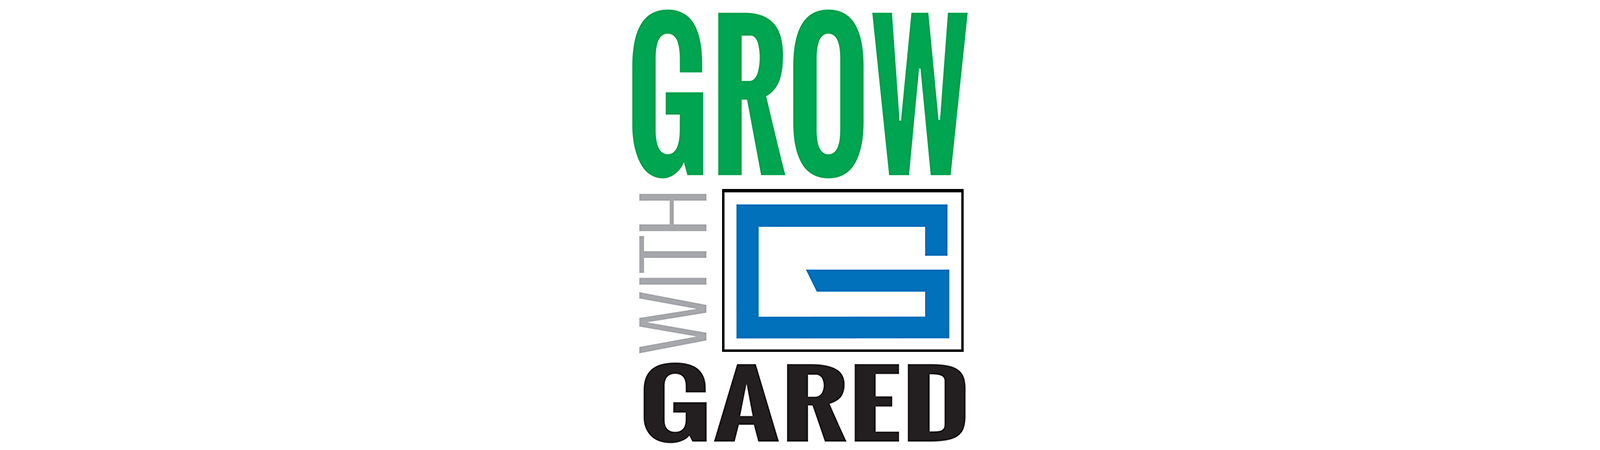 Grow with GARED